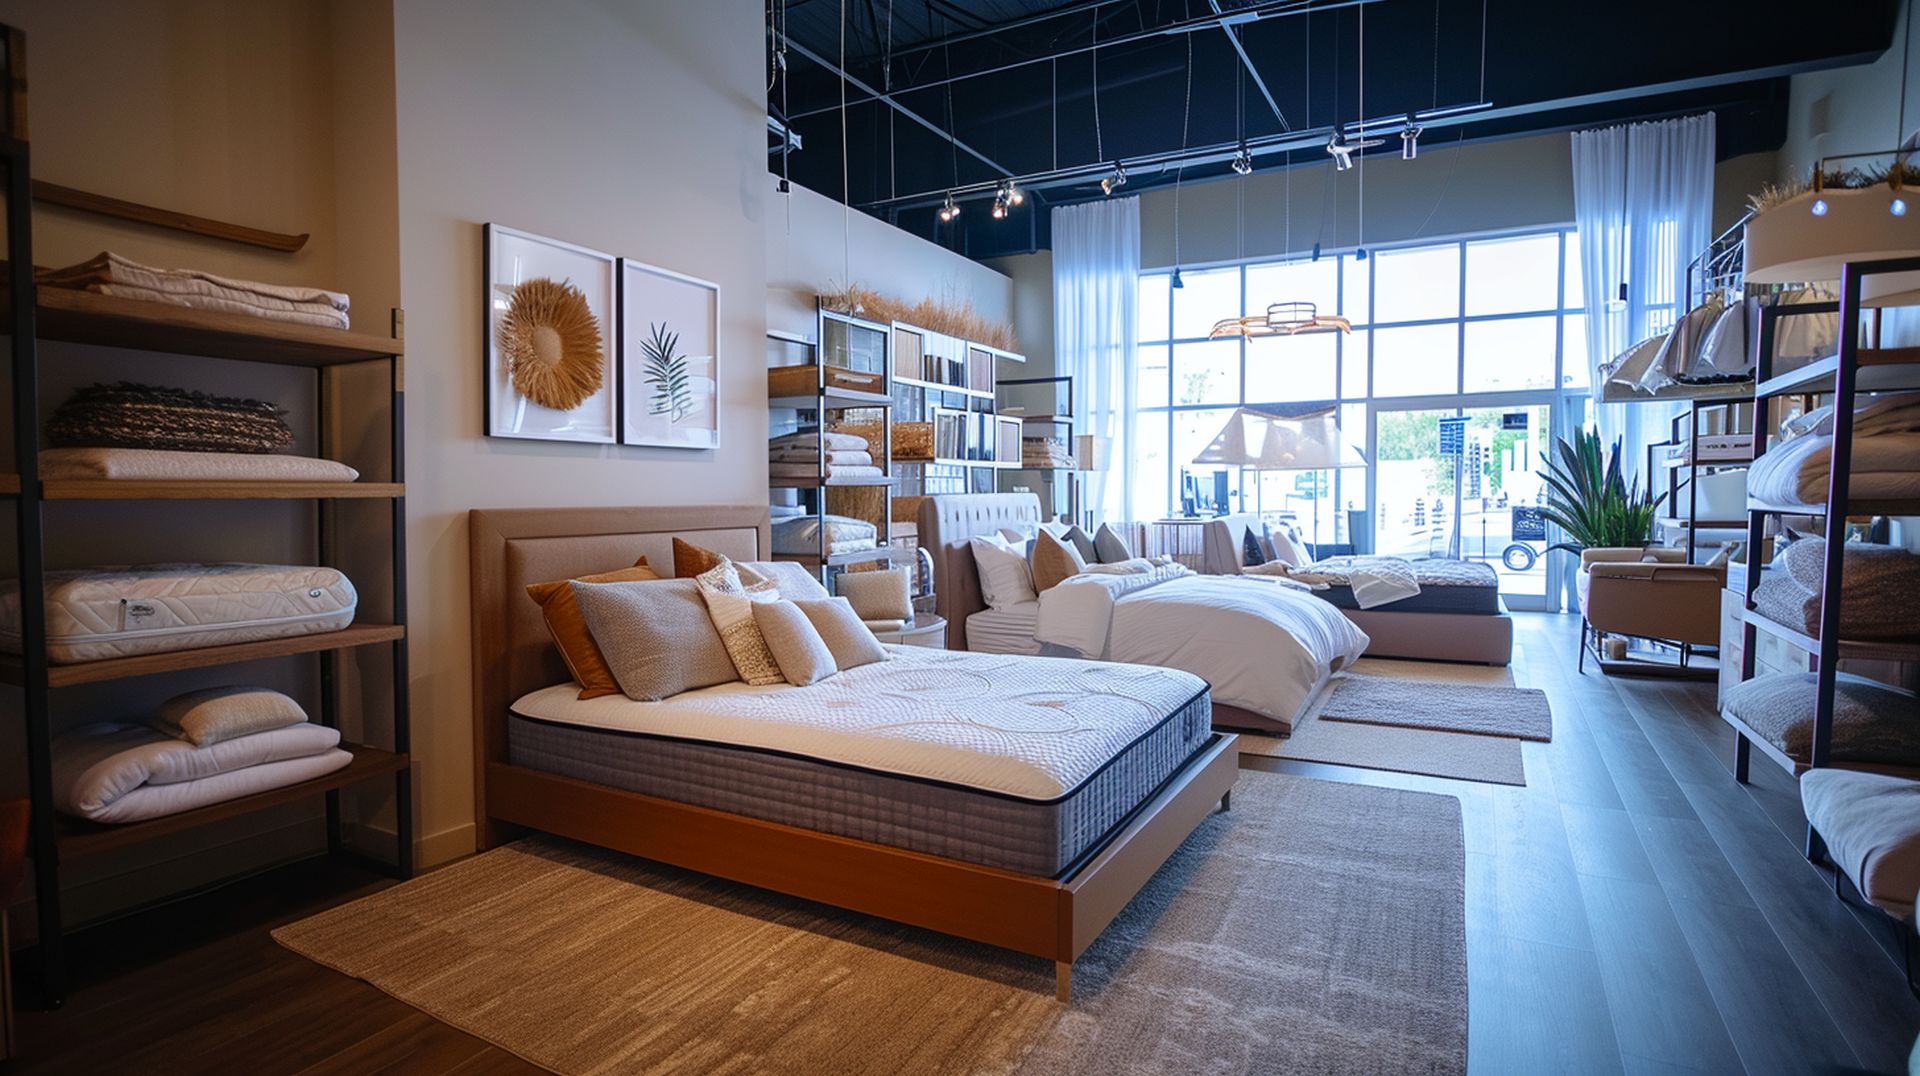 Types of mattresses at mattress dealers in Erie, PA